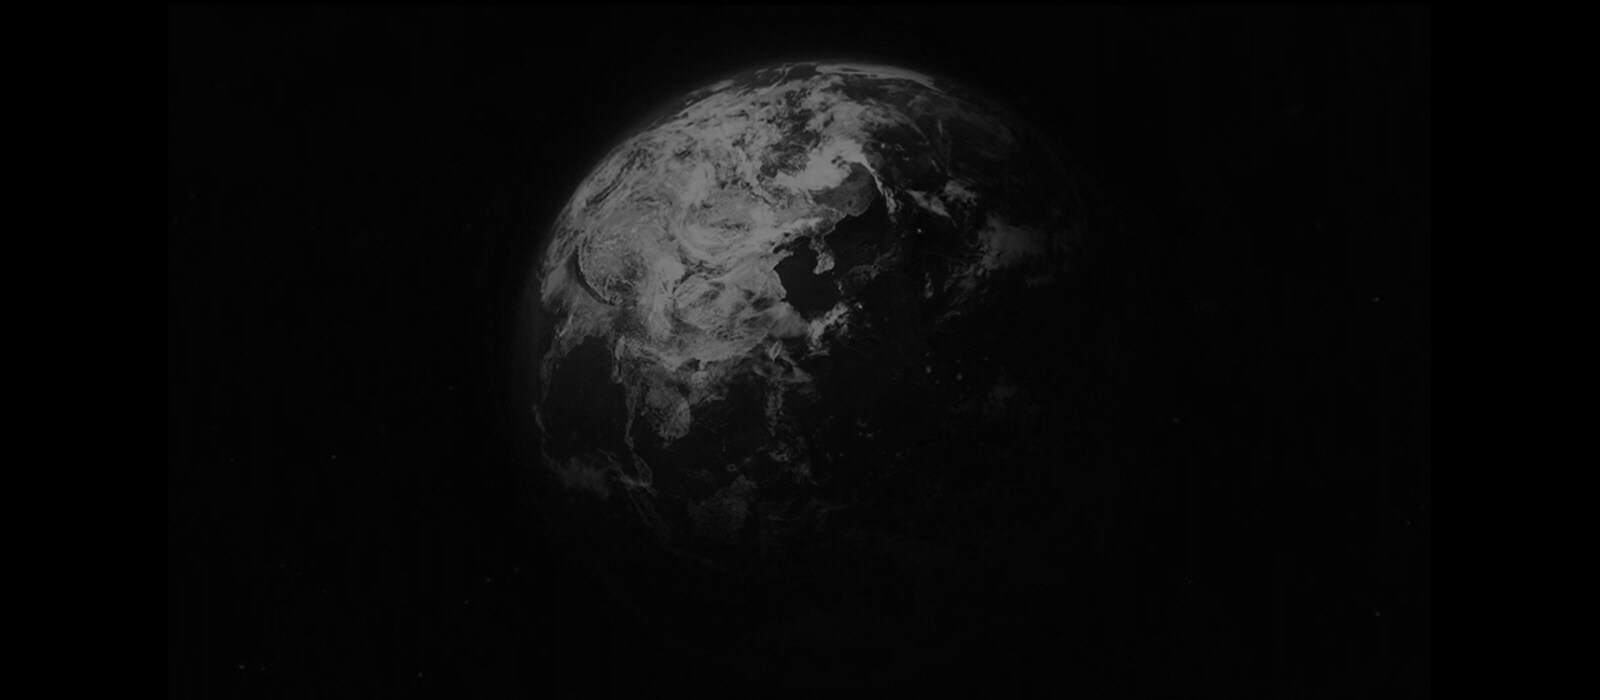 Image of the planet seen from space.